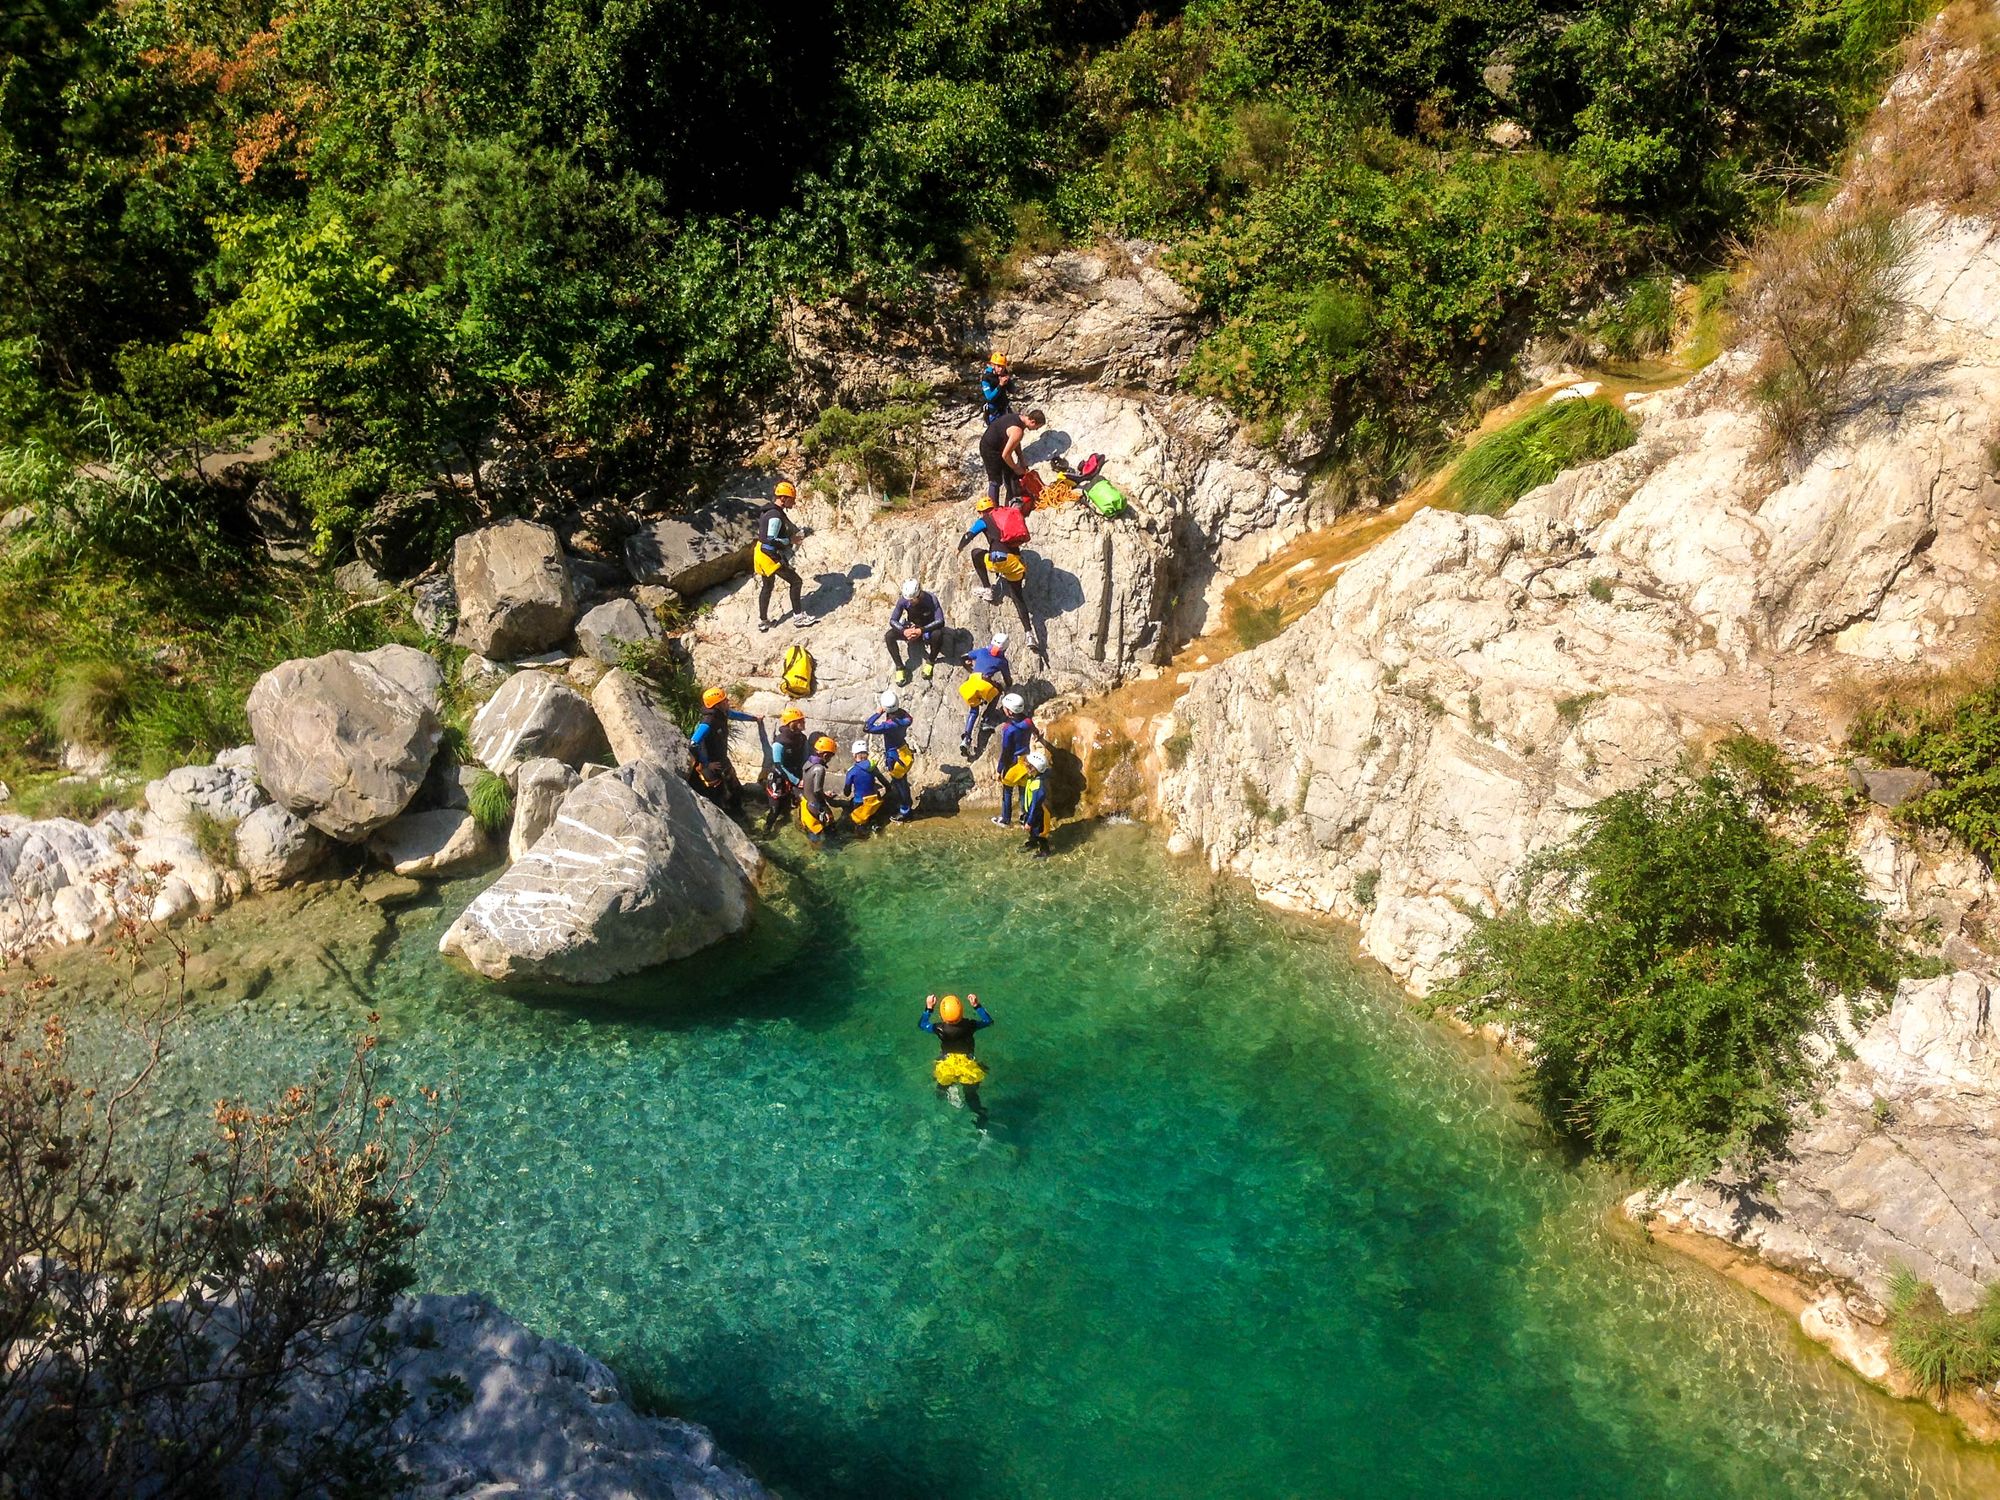 A coasteering team regroups after a successful outing, with turquoise water and sun-hit rocks.